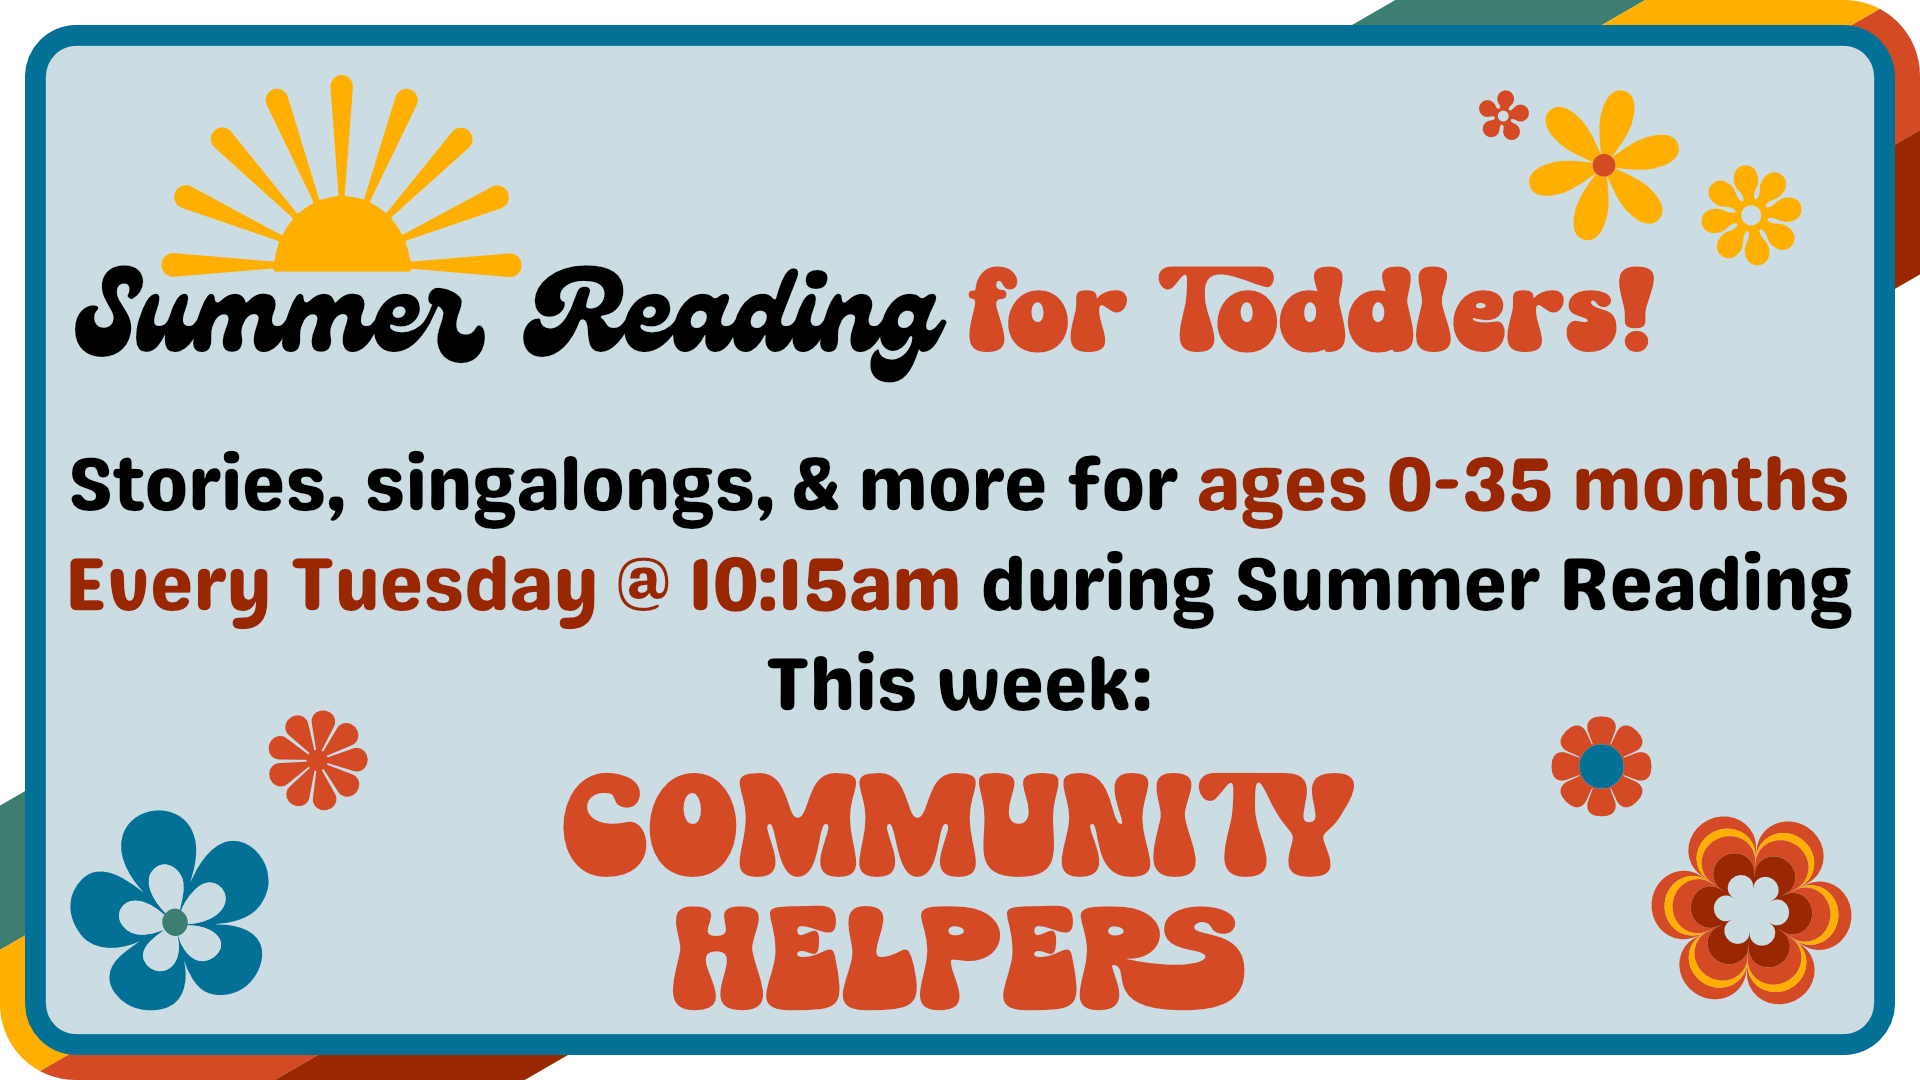 Summer Reading for toddlers, every Tuesday at 10:15am